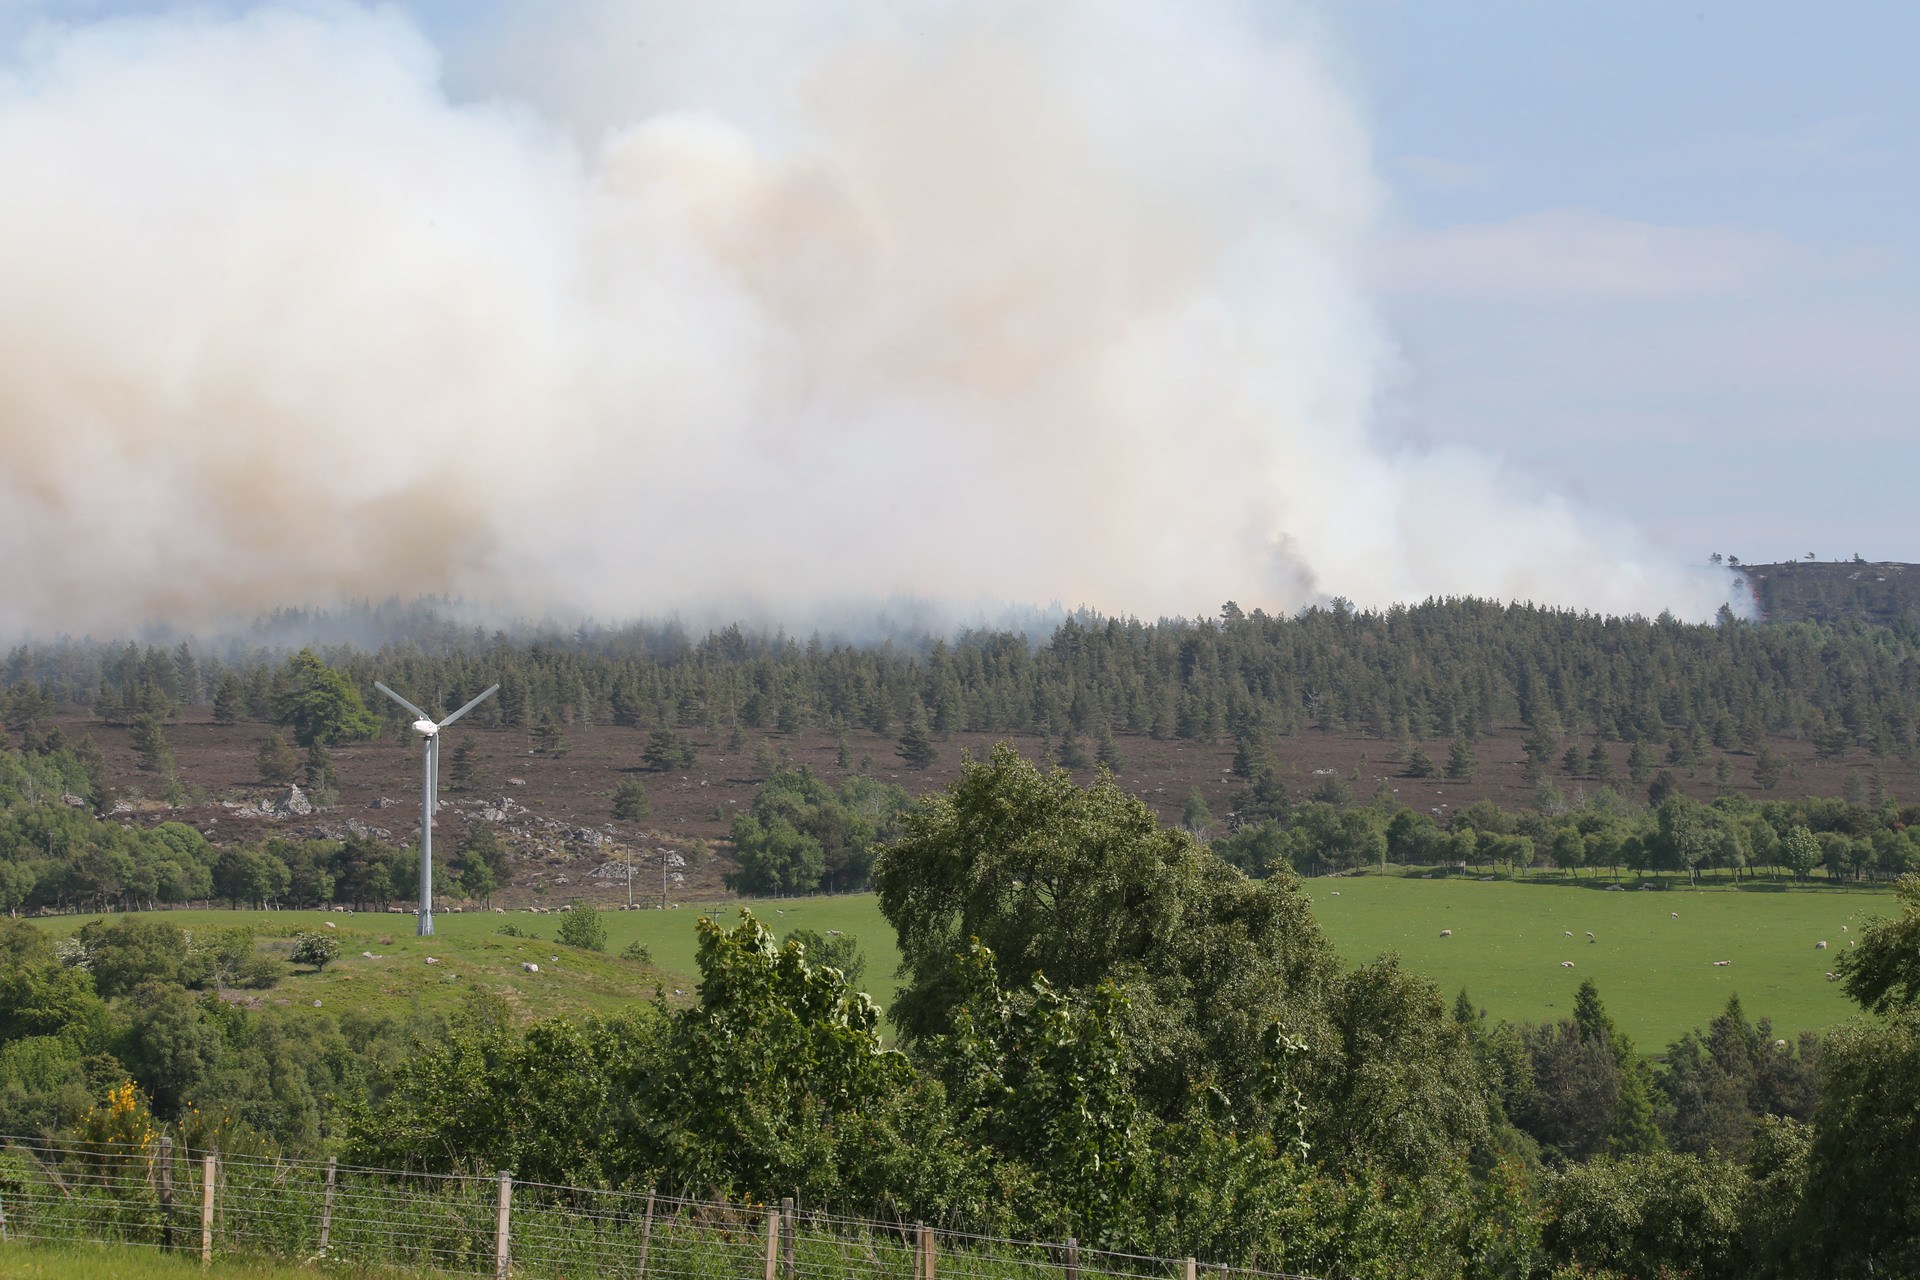 Smoke can be seen from several miles away.